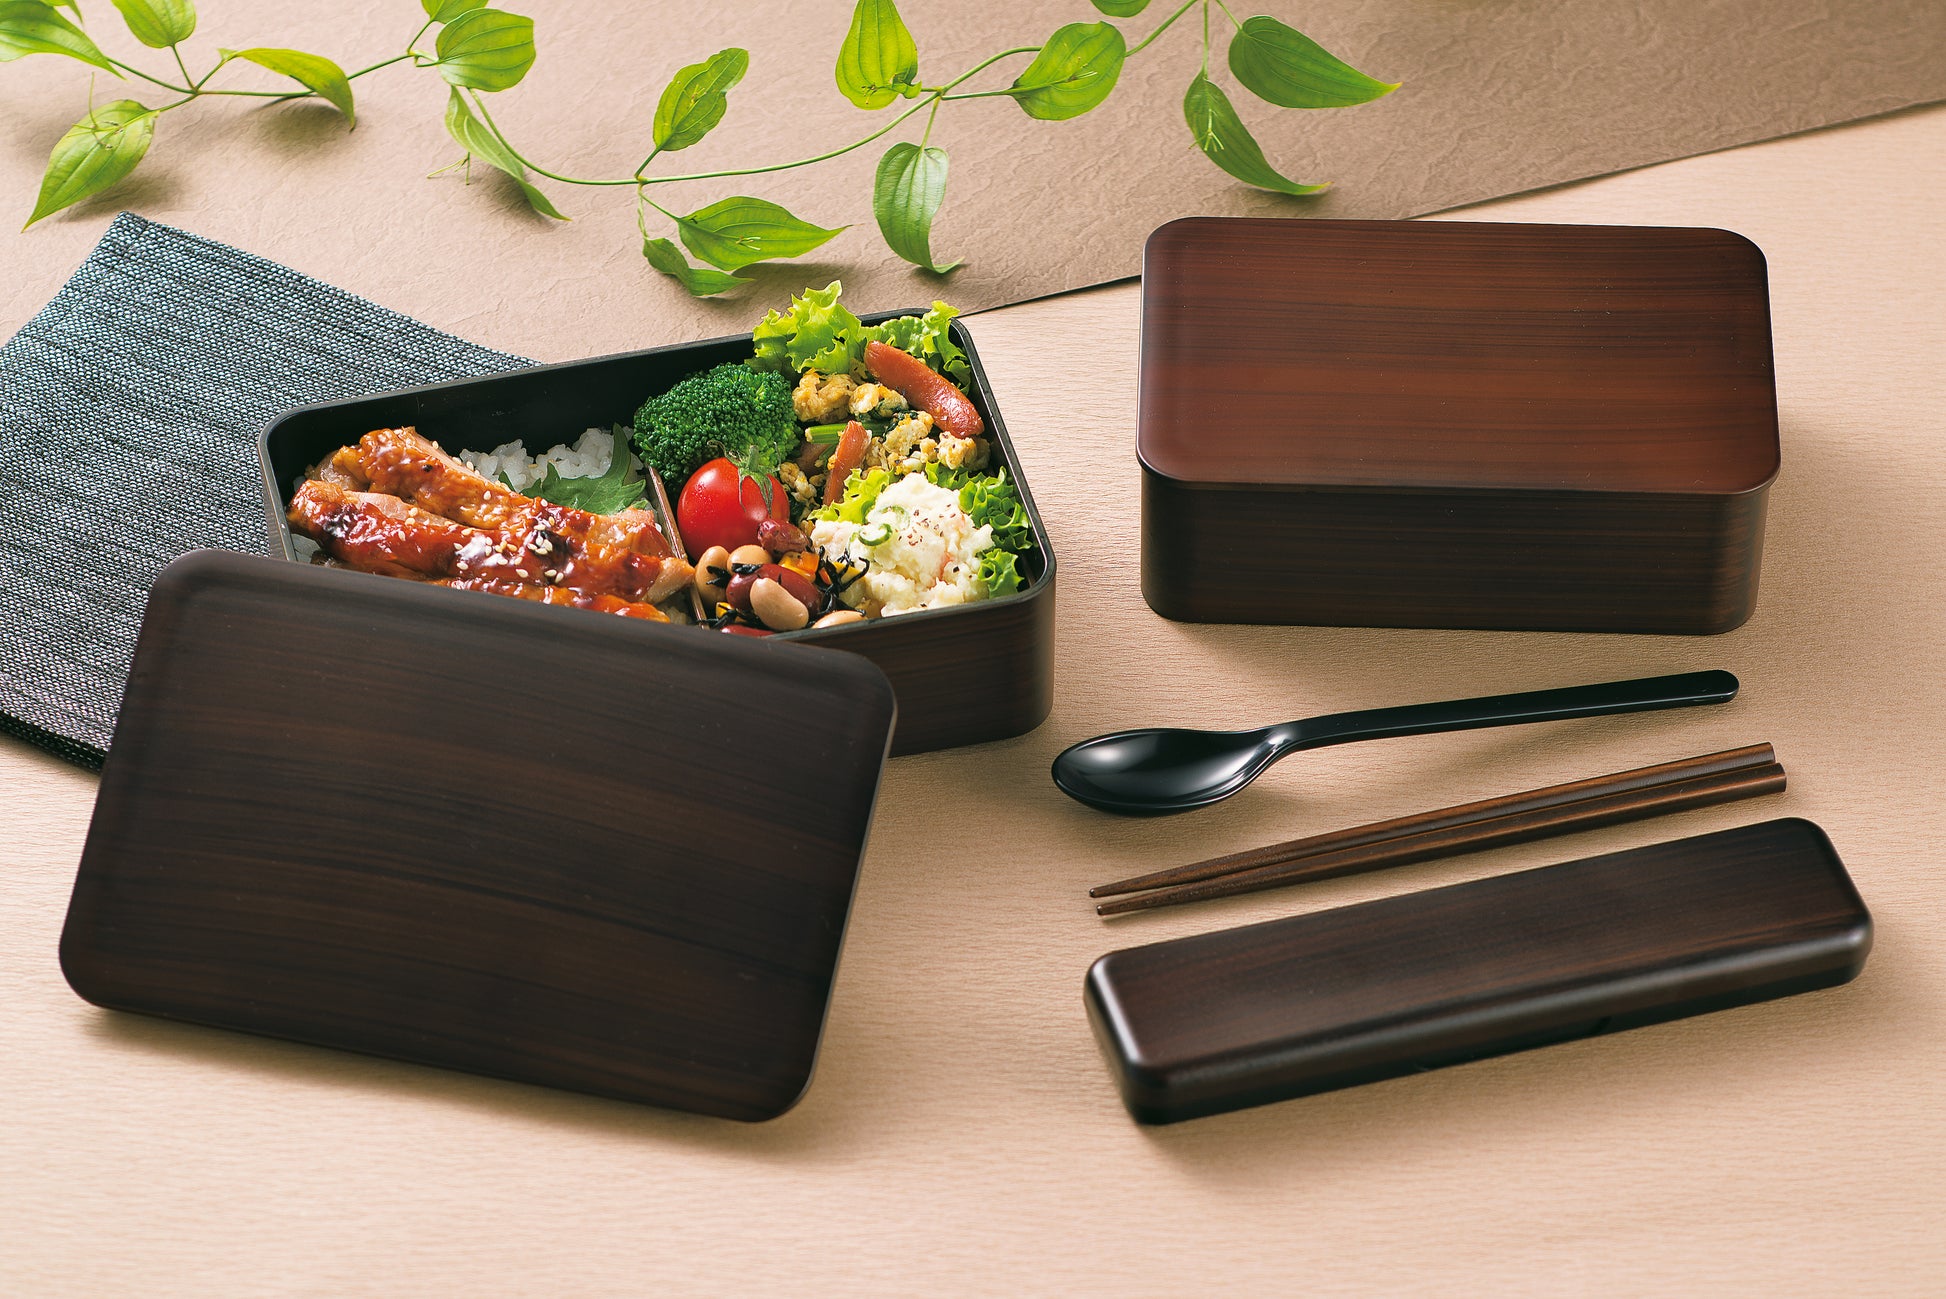 Tochinoki Single Bento Box 800mL by Hakoya - Bento&co Japanese Bento Lunch Boxes and Kitchenware Specialists